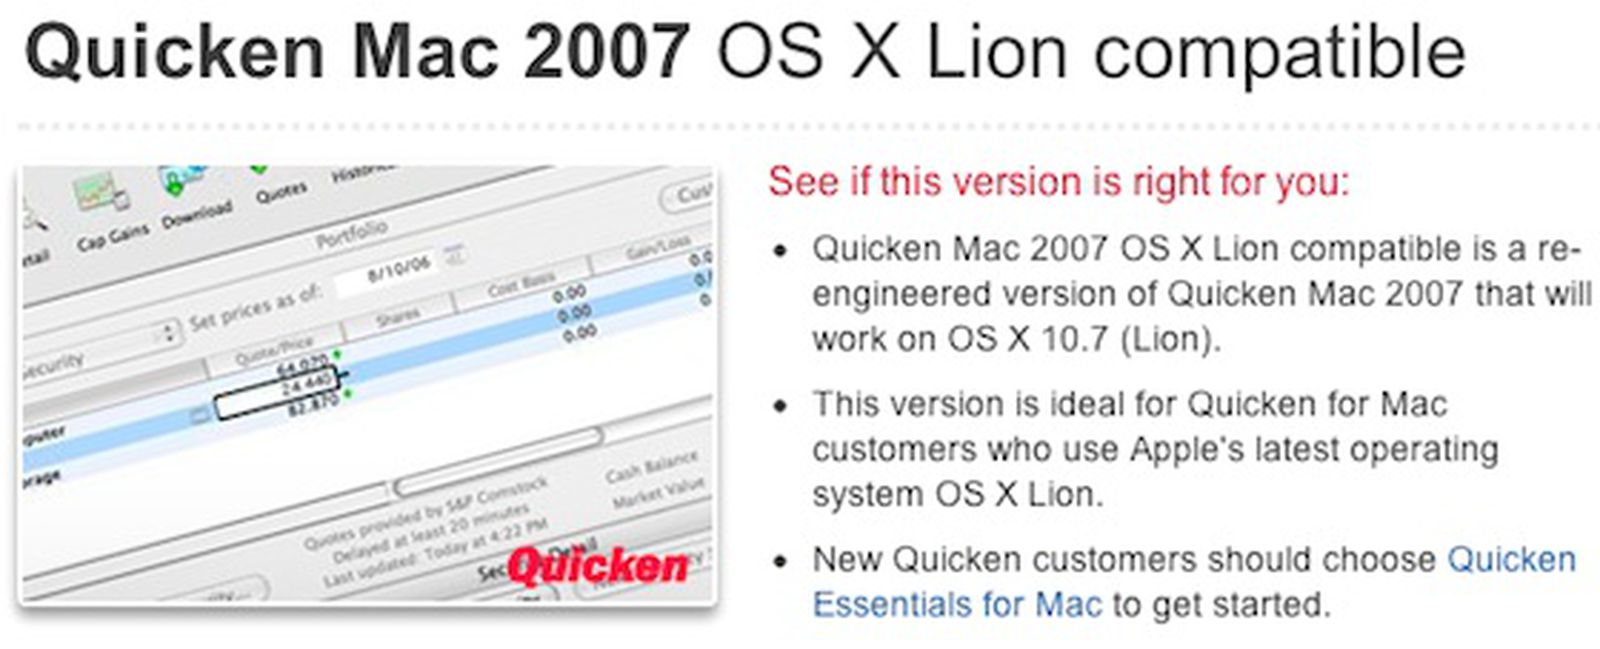 intuit support for quicken for mac 2006